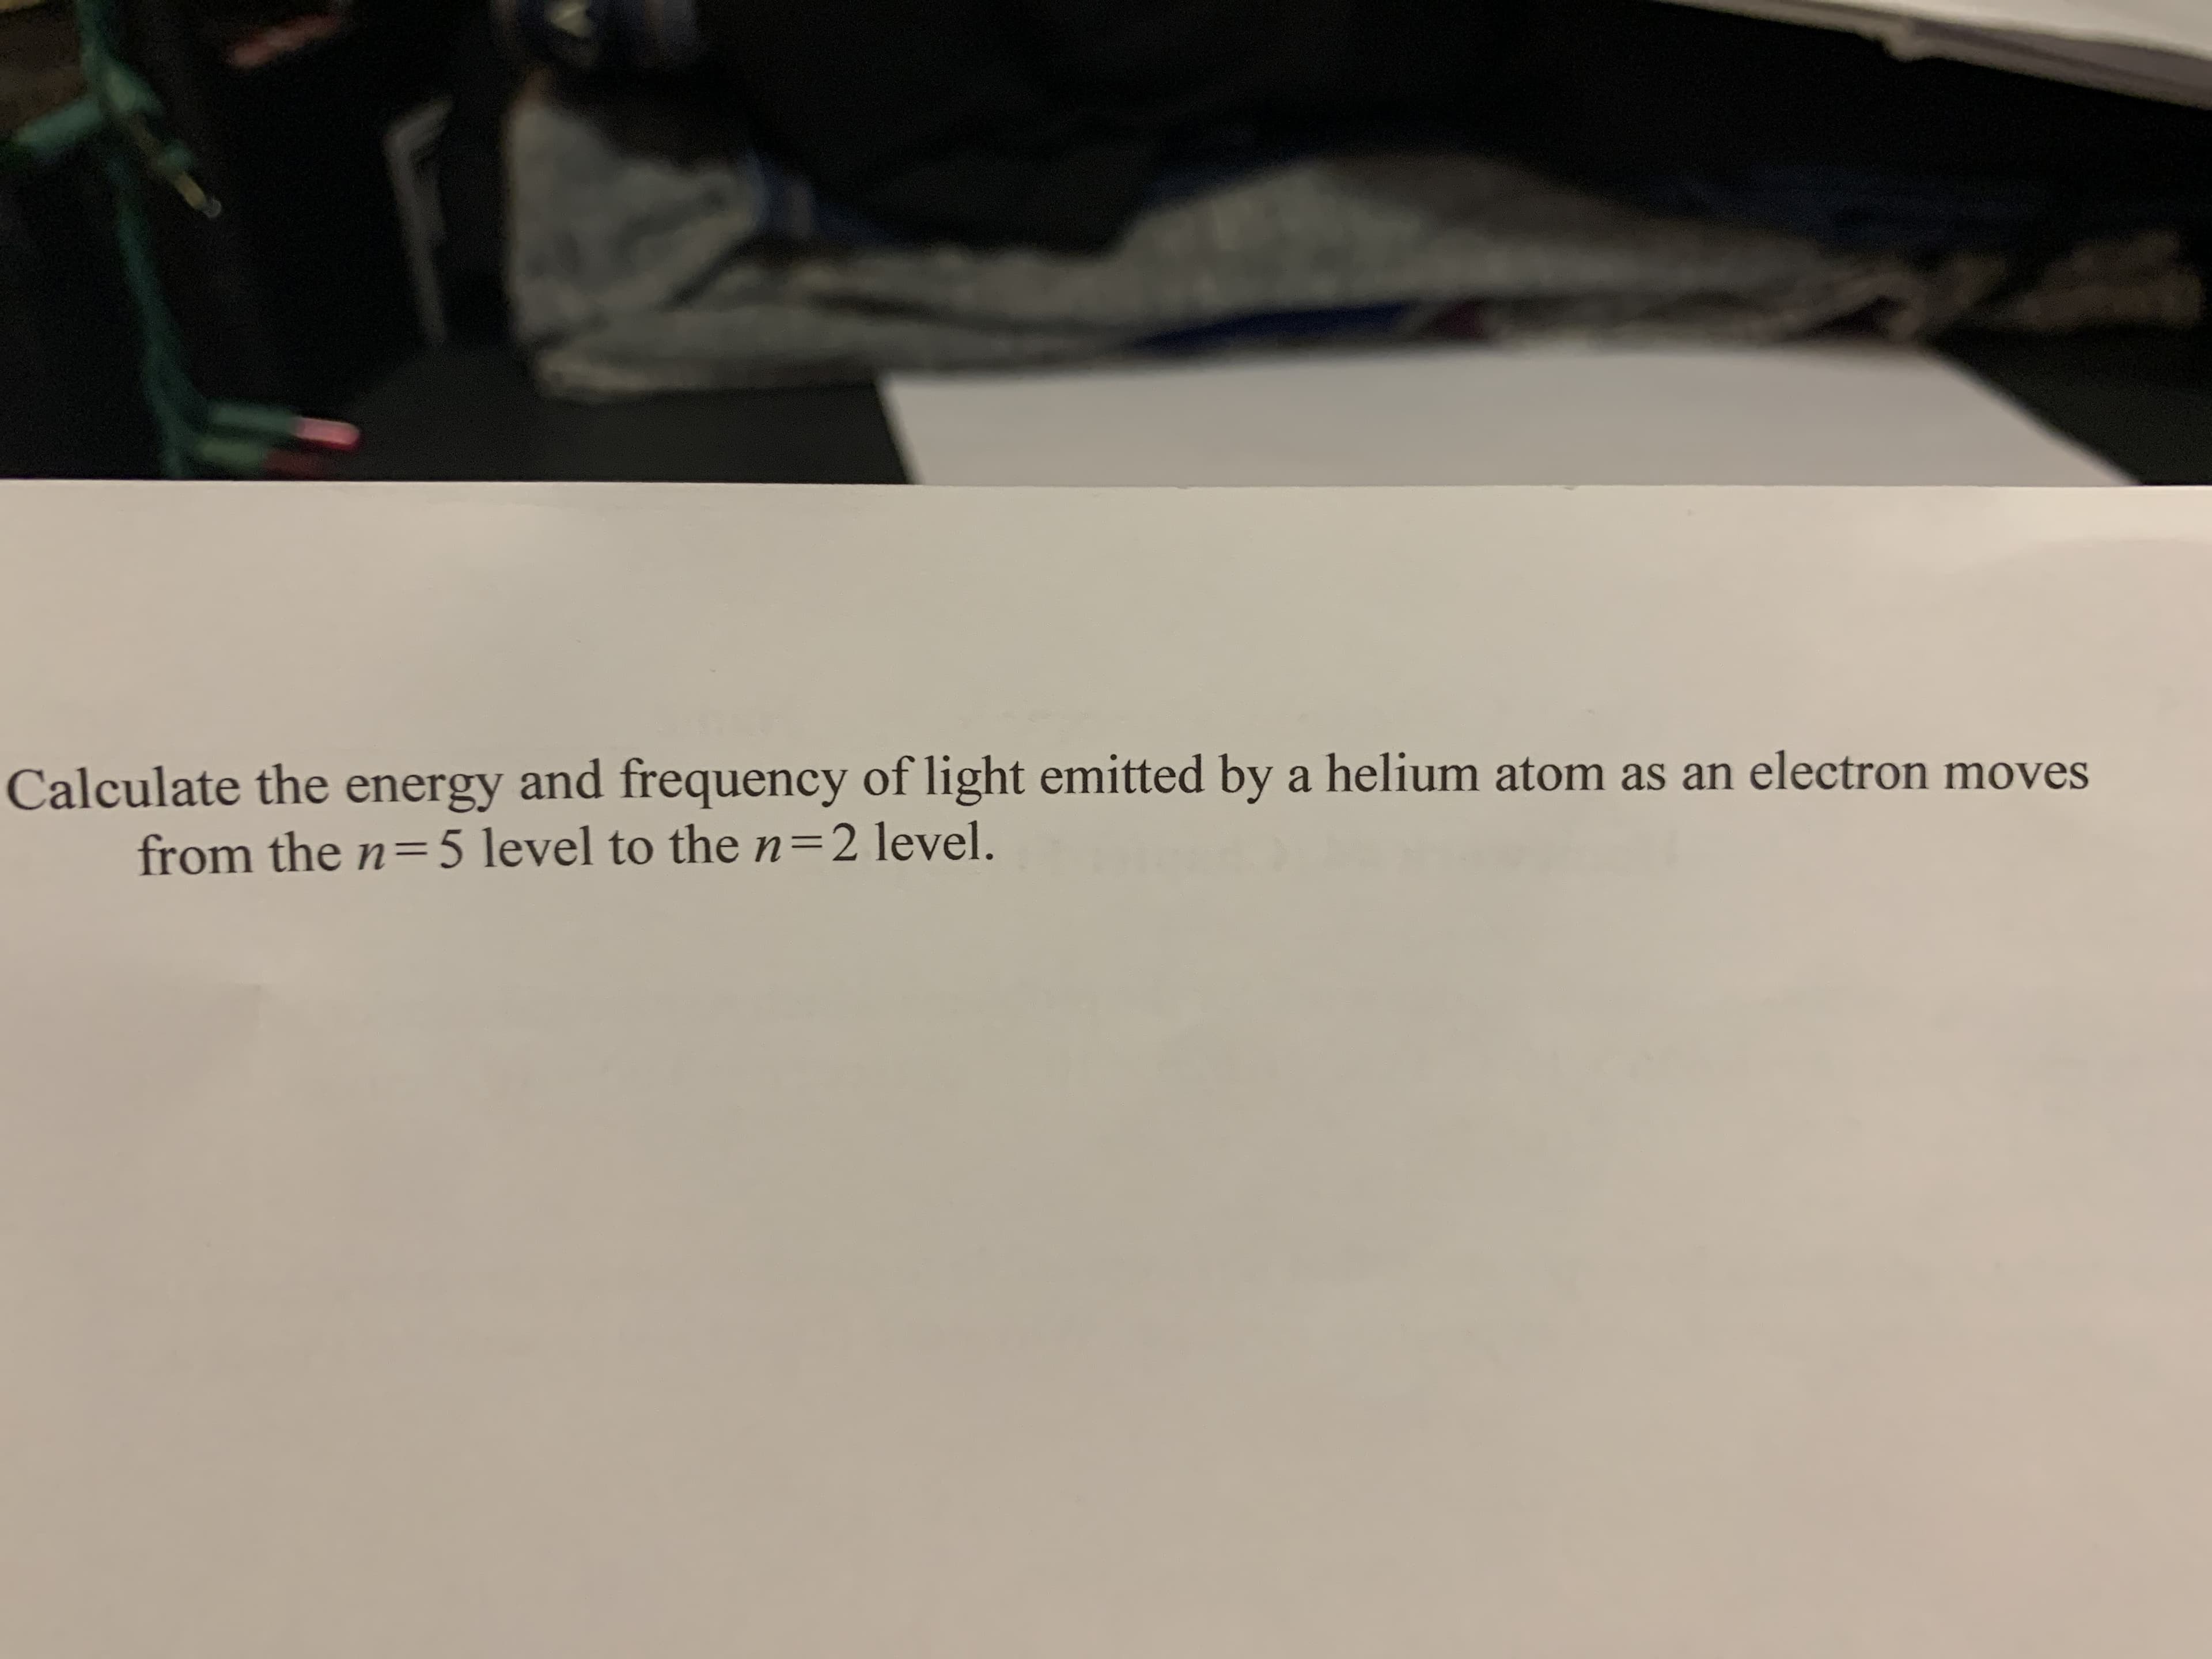 Calculate the energy and frequency of light emitted by a helium atom as an electron moves
from the n= 5 level to the n=2 level.
